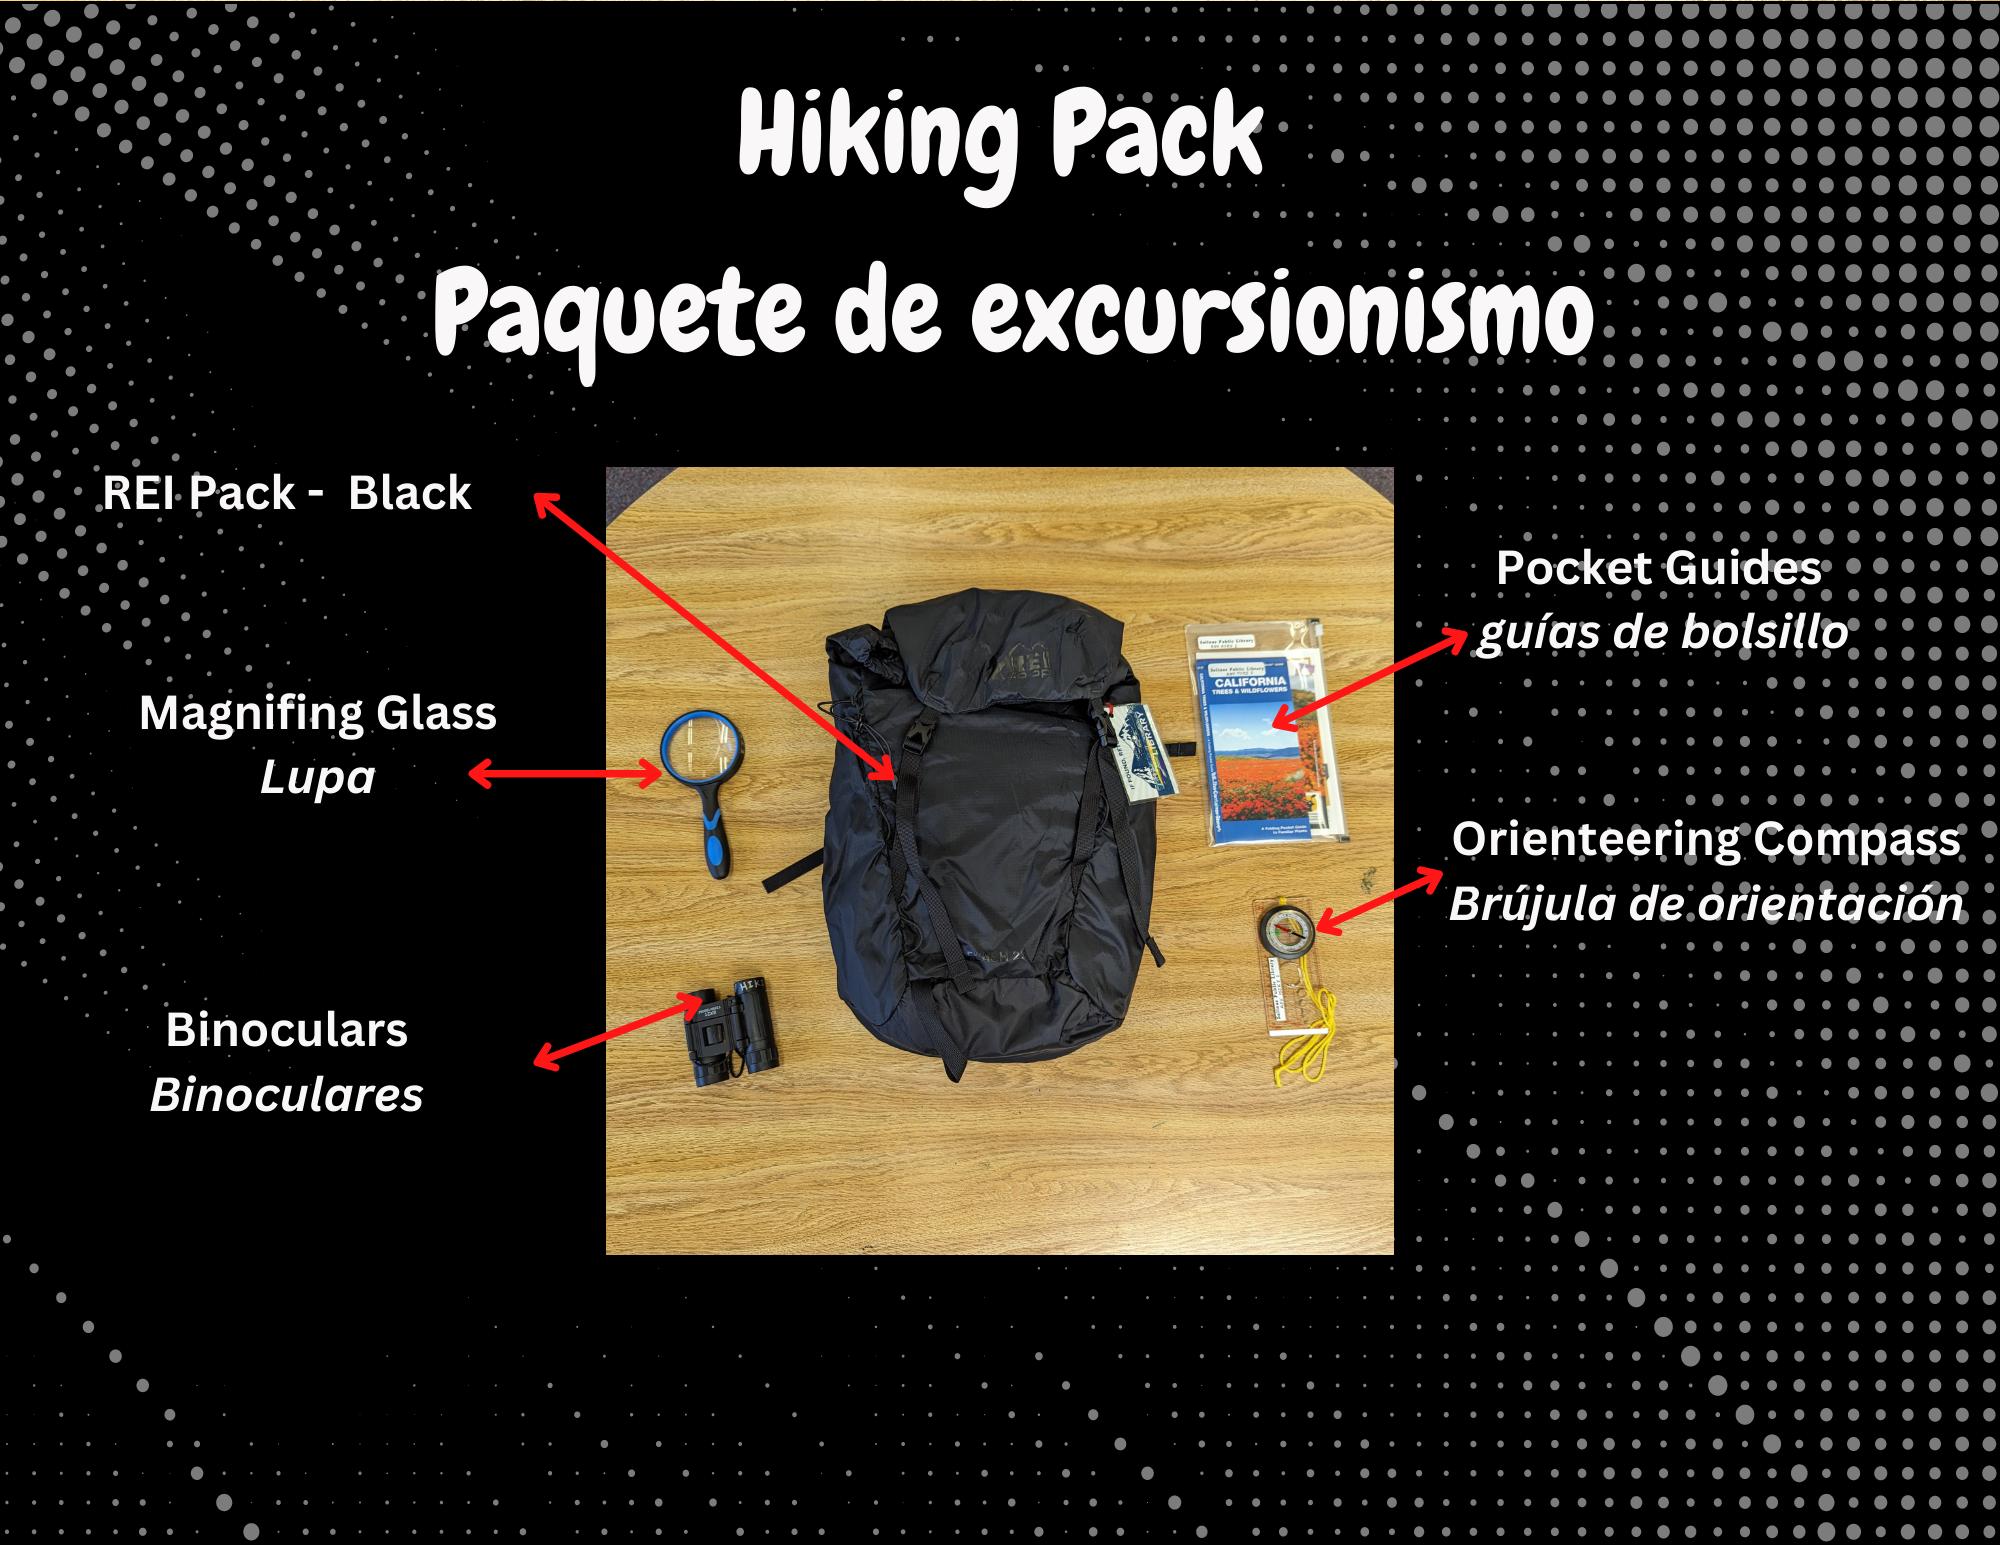 Hiking Pack Contents